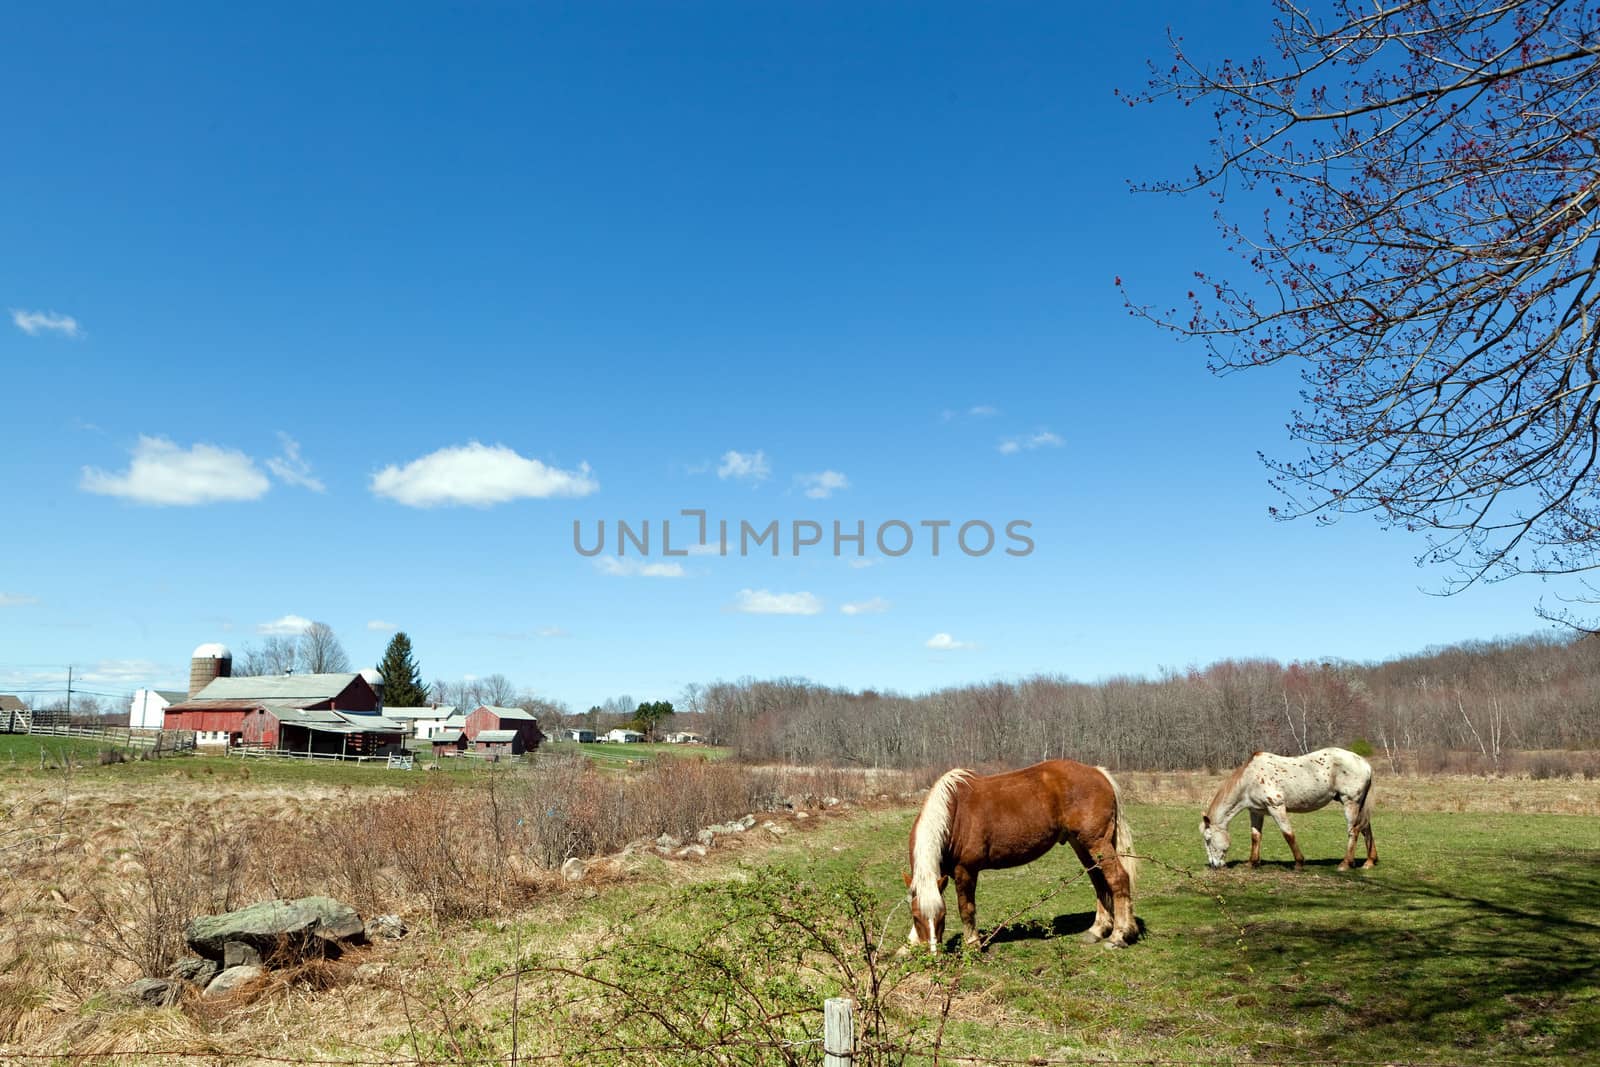 Two beautiful horses grazing in a field during early Spring time.